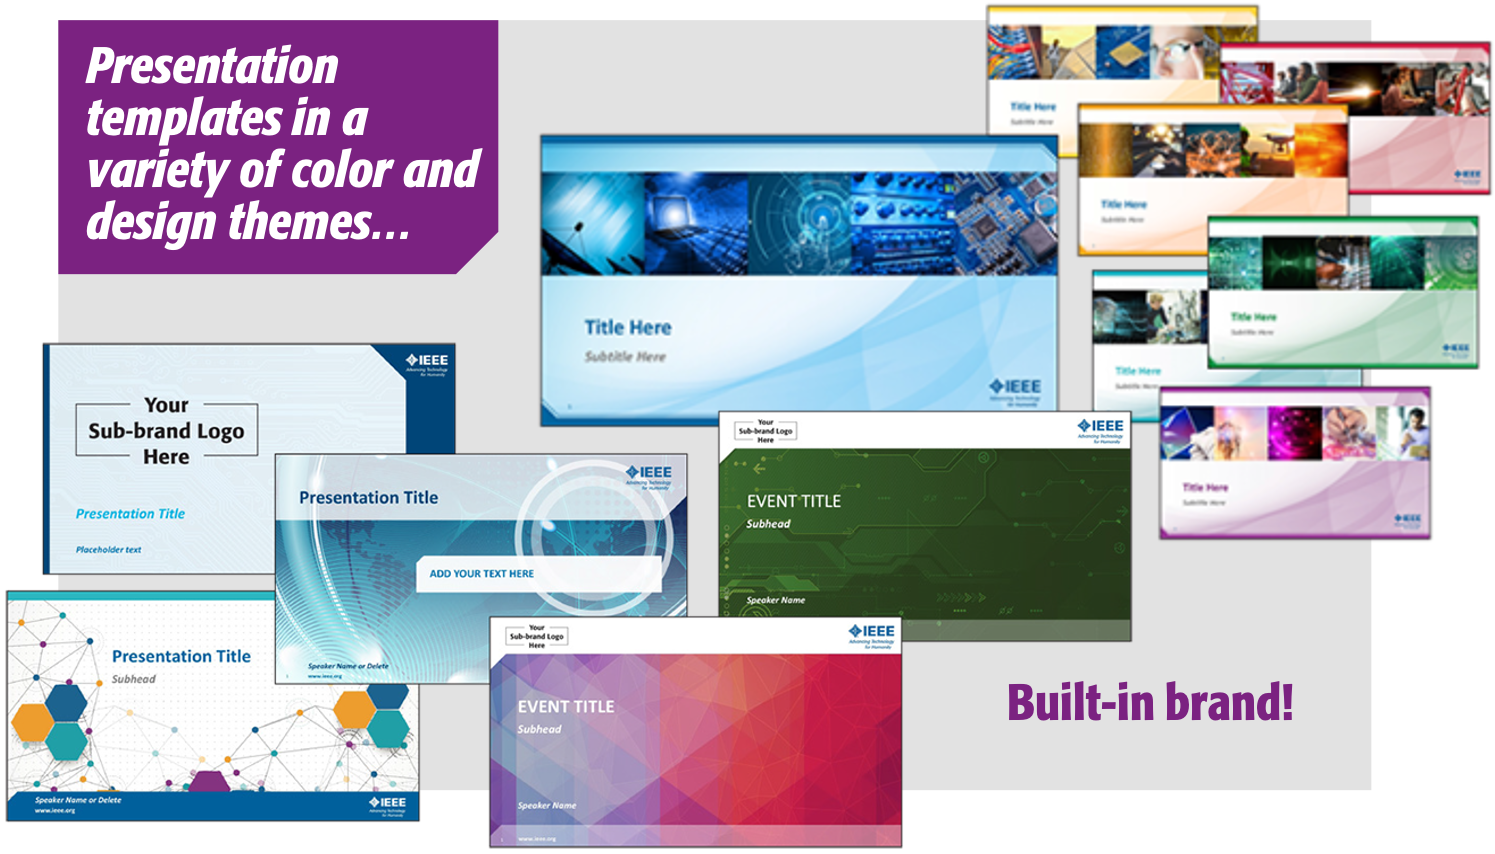 Presentation templates in a variety of color and design themes